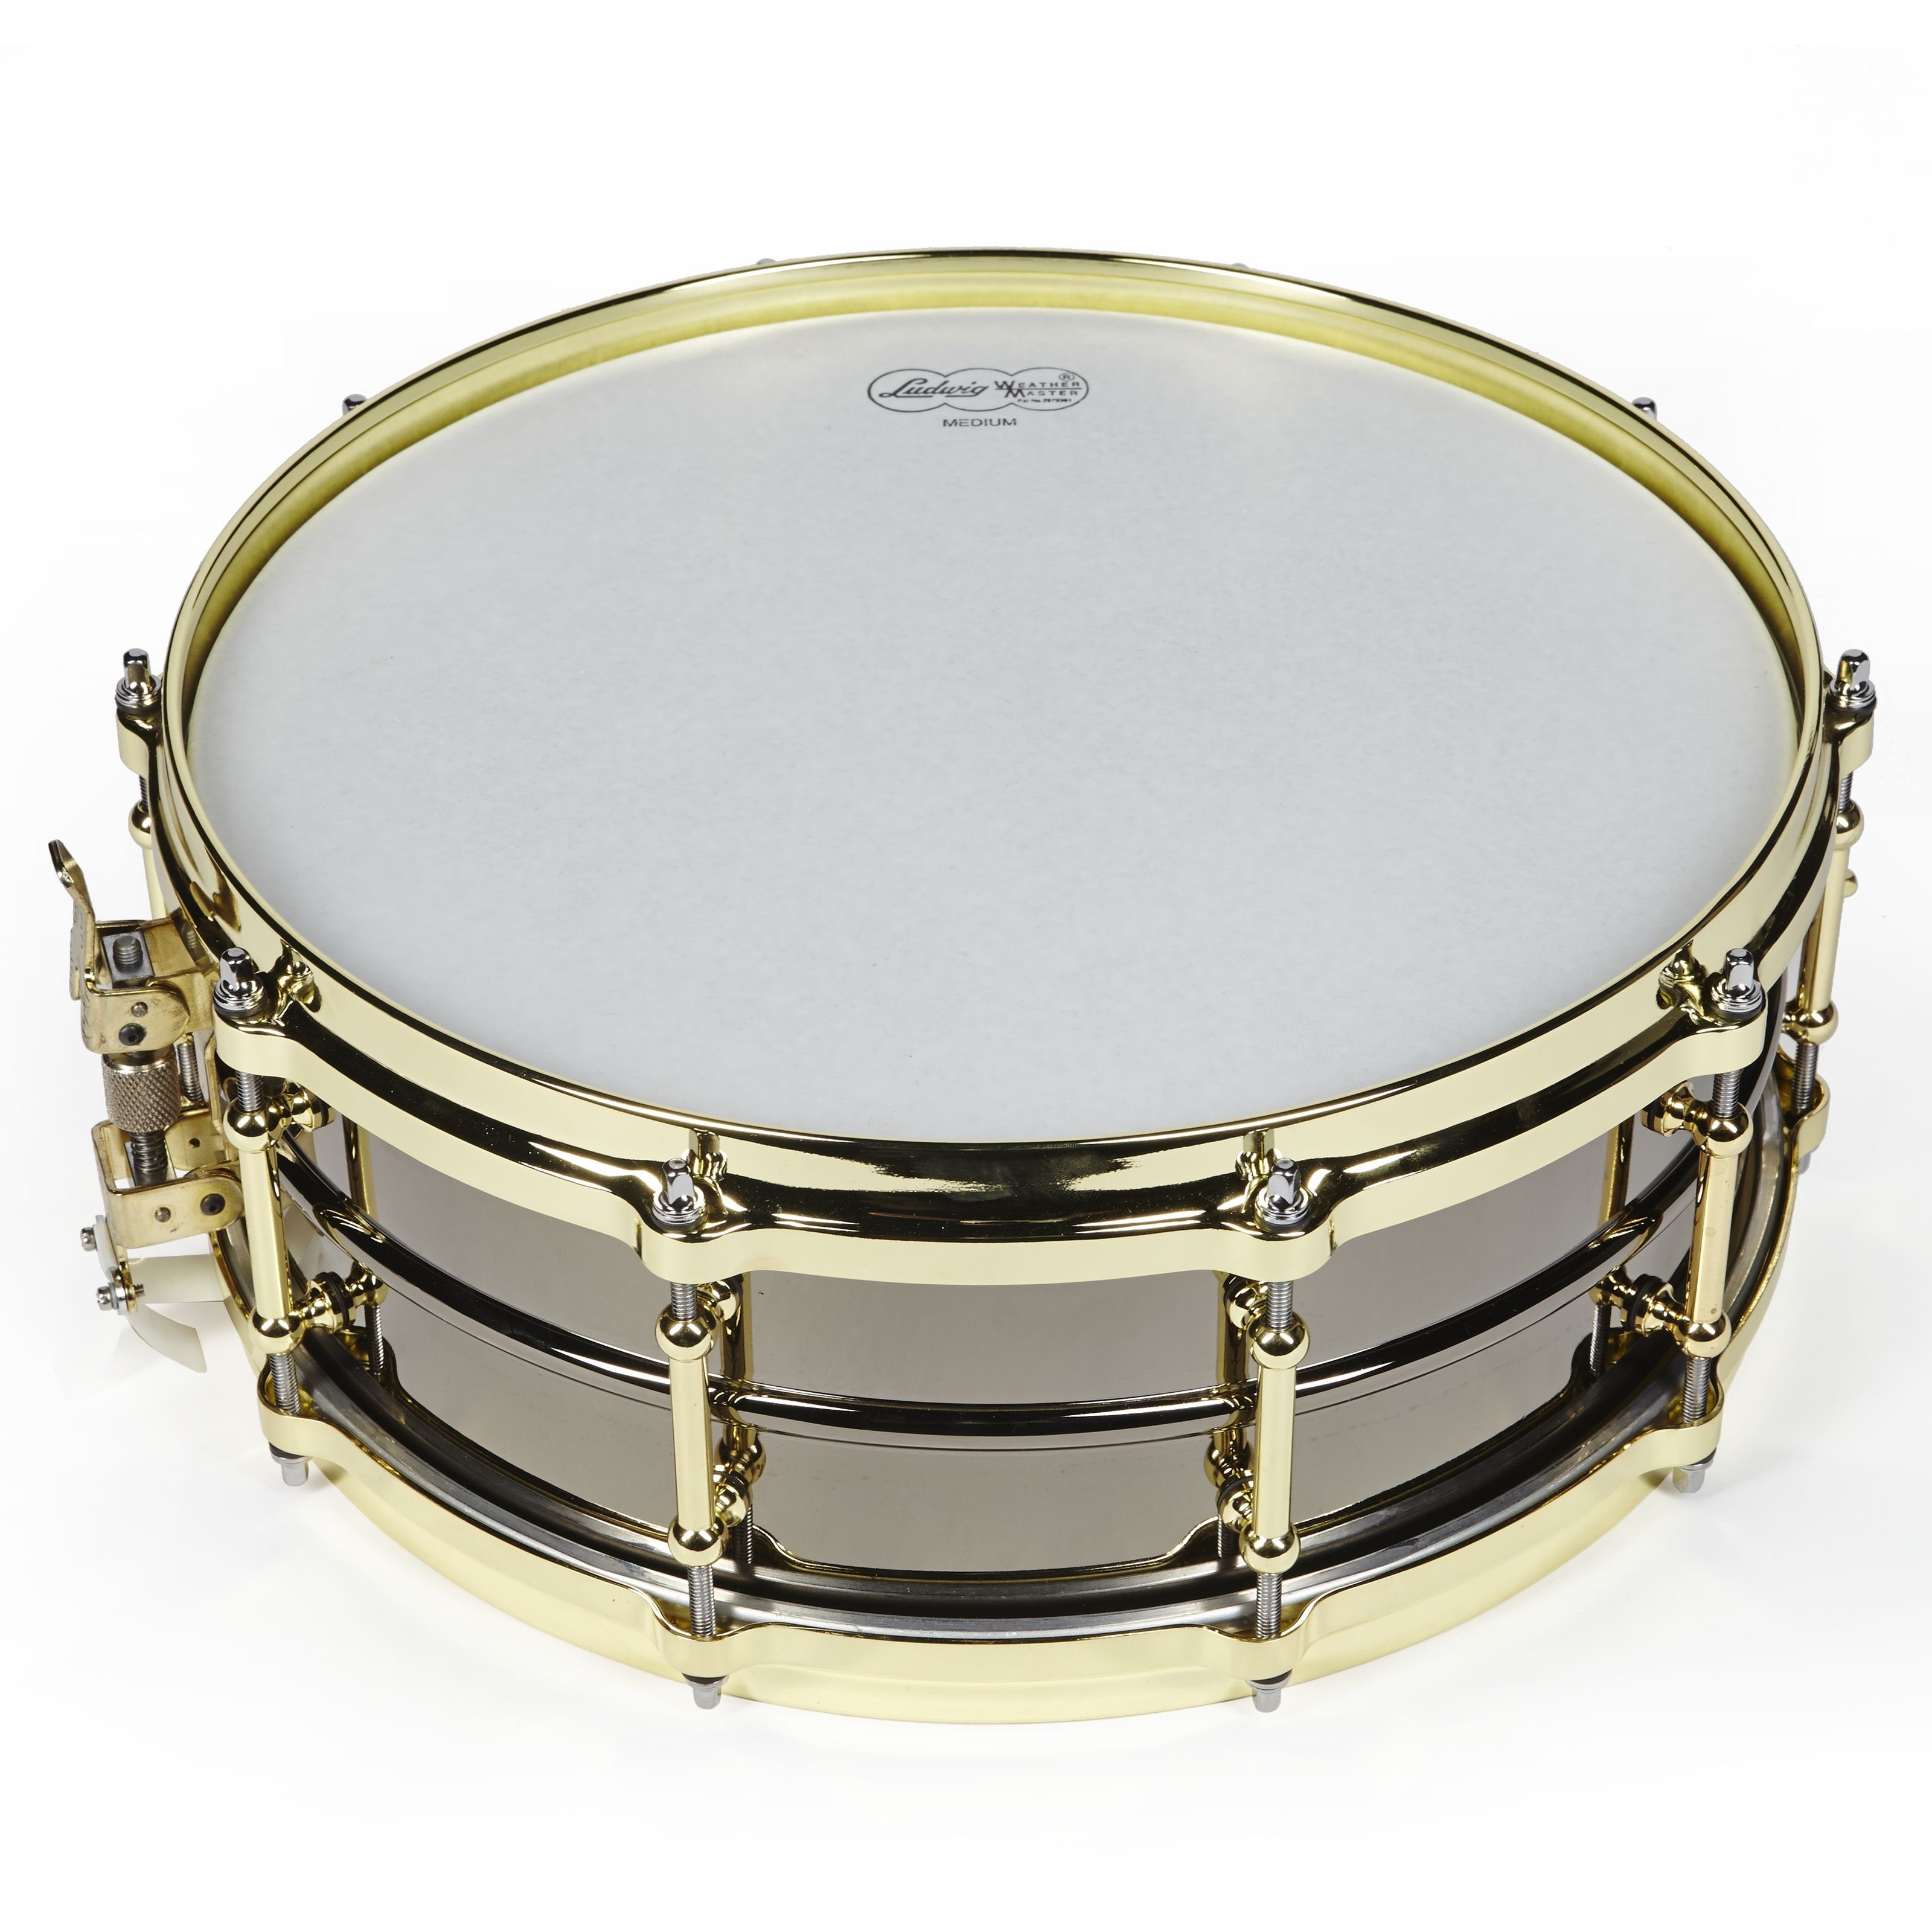 Ludwig Snare Drum,Black Beauty Snare LB416BT 14"x5" Brass Tube Lugs P86, Schlagzeuge, Snare Drums, Black Beauty Snare LB416BT 14"x5", Brass Tube Lugs P86 - Snare Drum